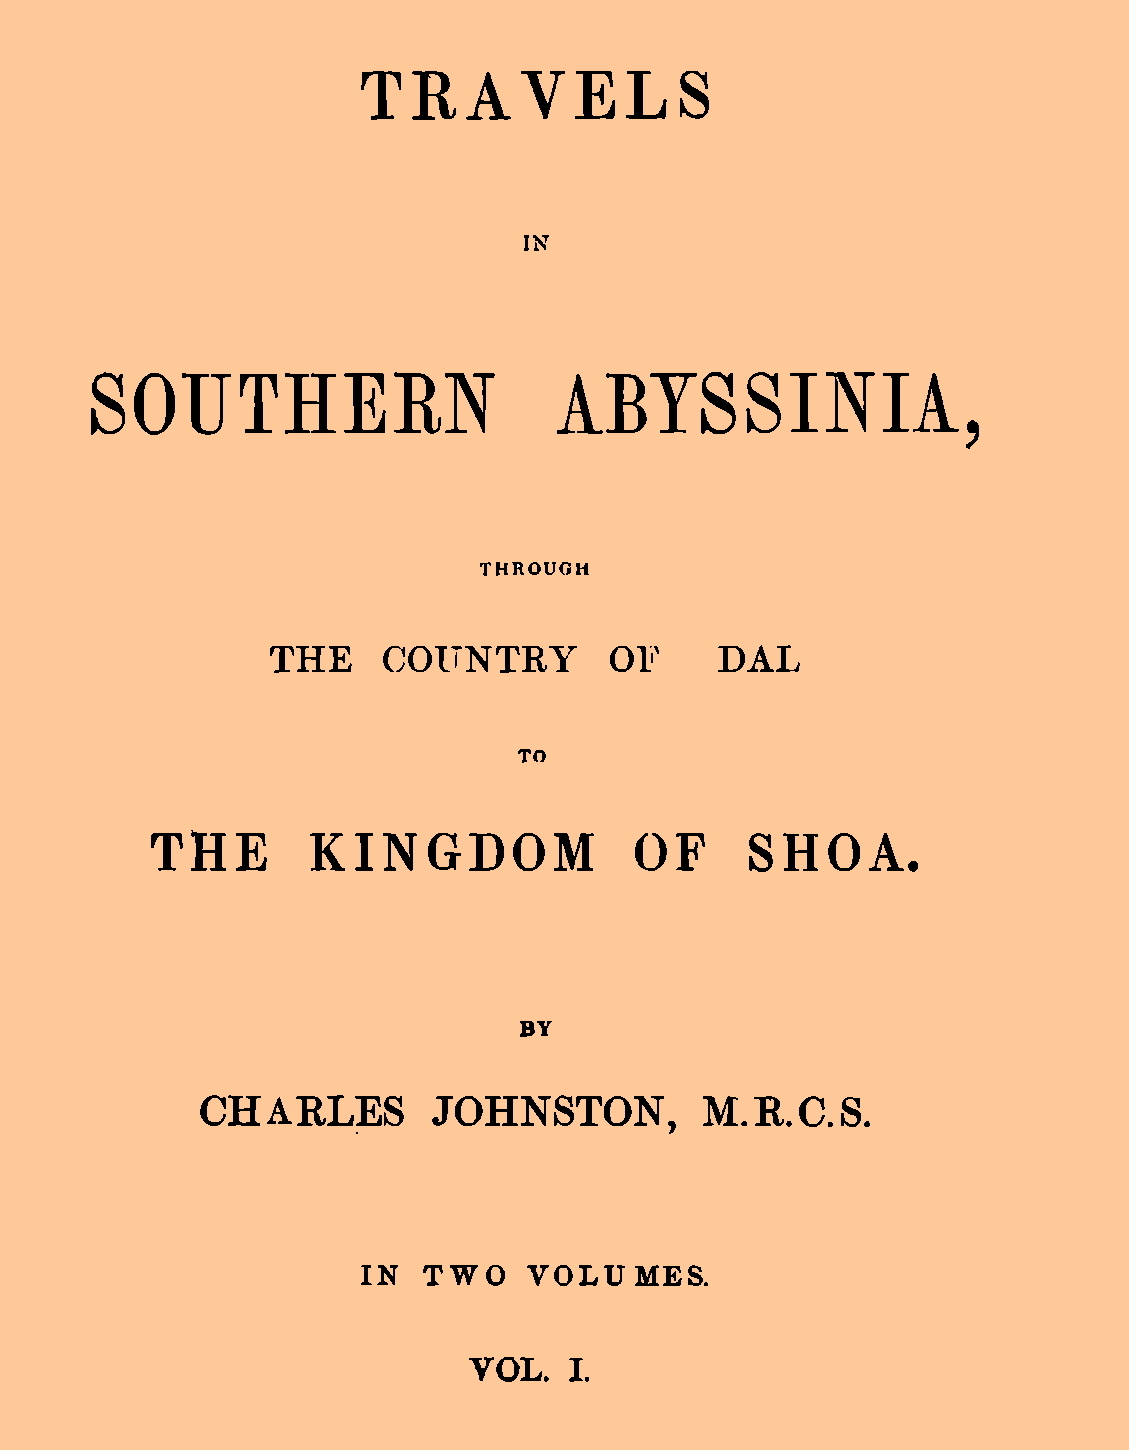 Travels in Southern Abyssinia